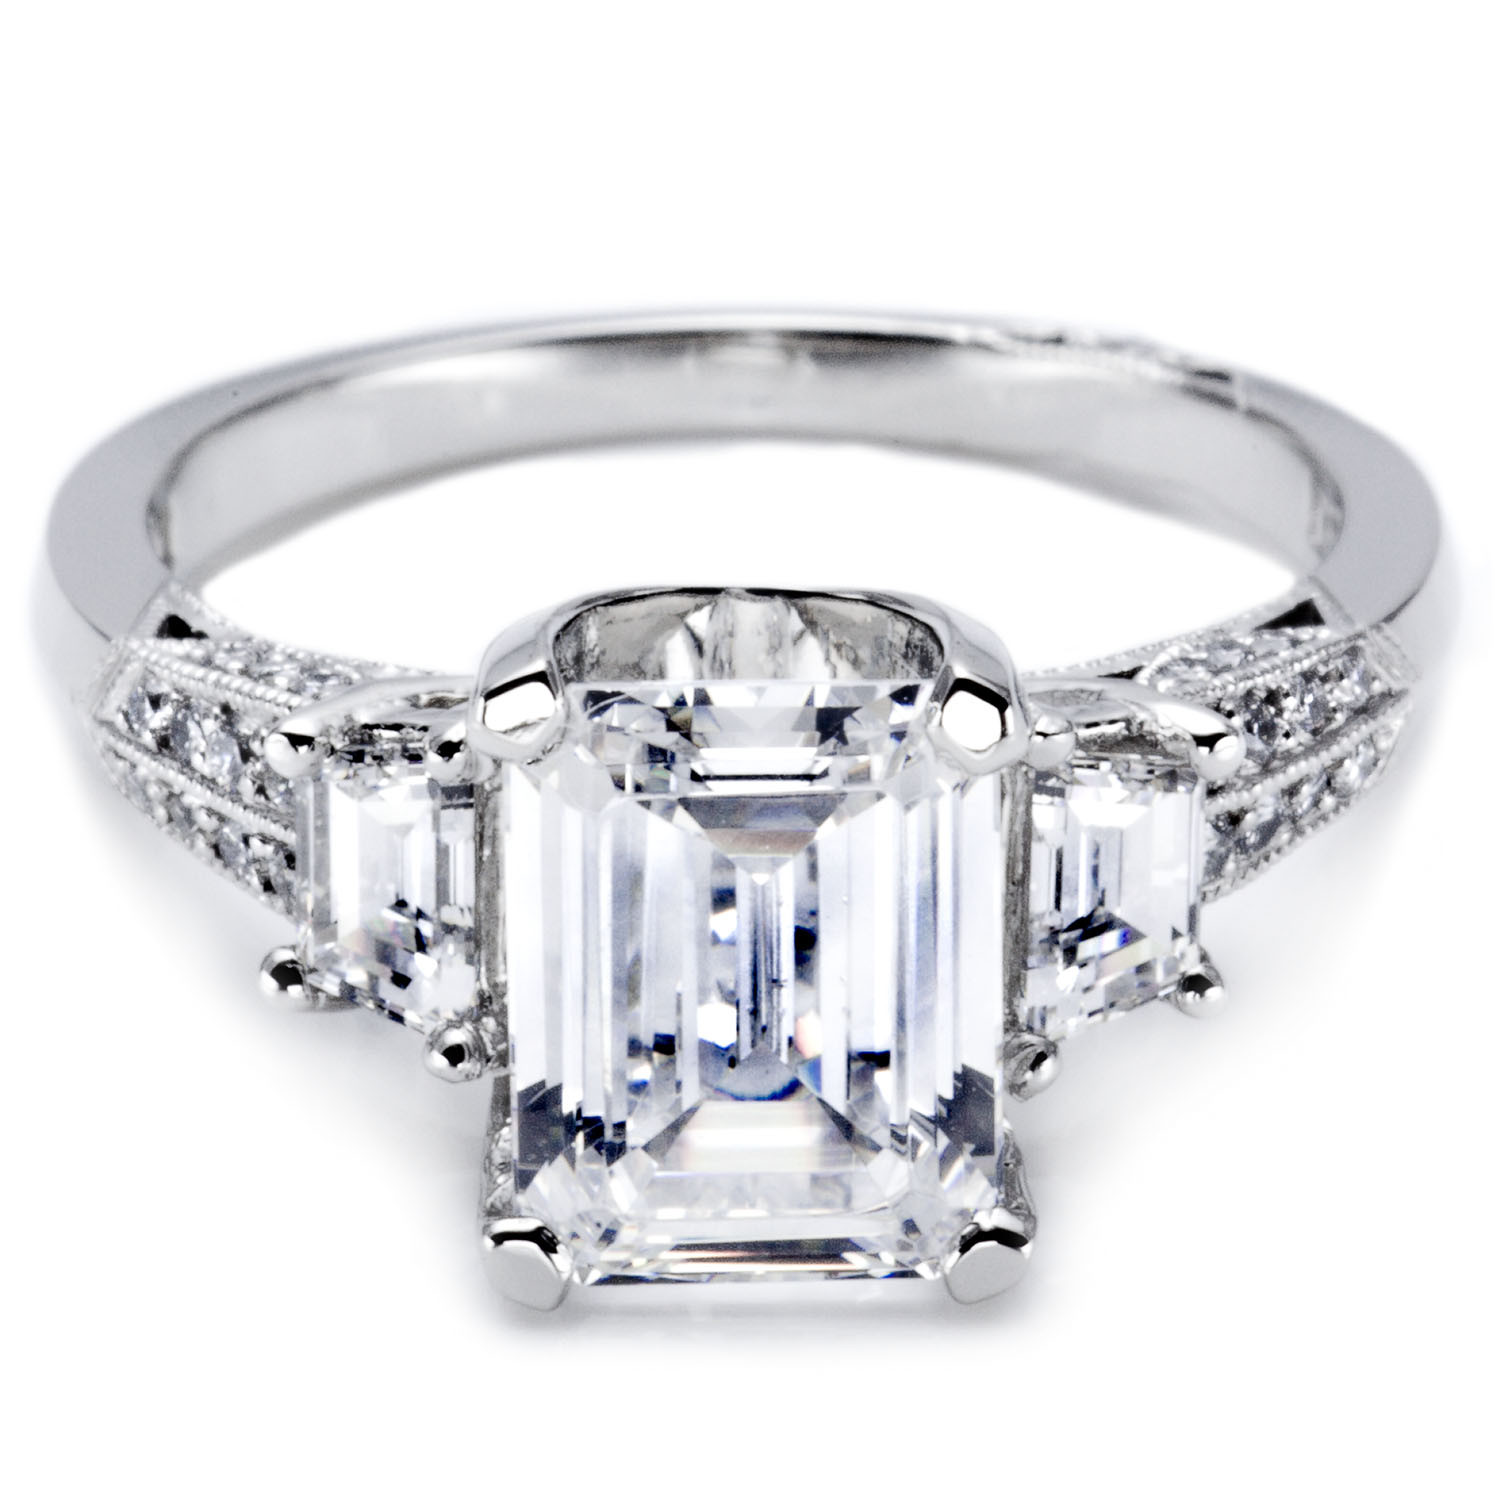 Emerald Cut Wedding Rings
 Gorgeous Tacori Emerald Engagement Rings Have your Dream